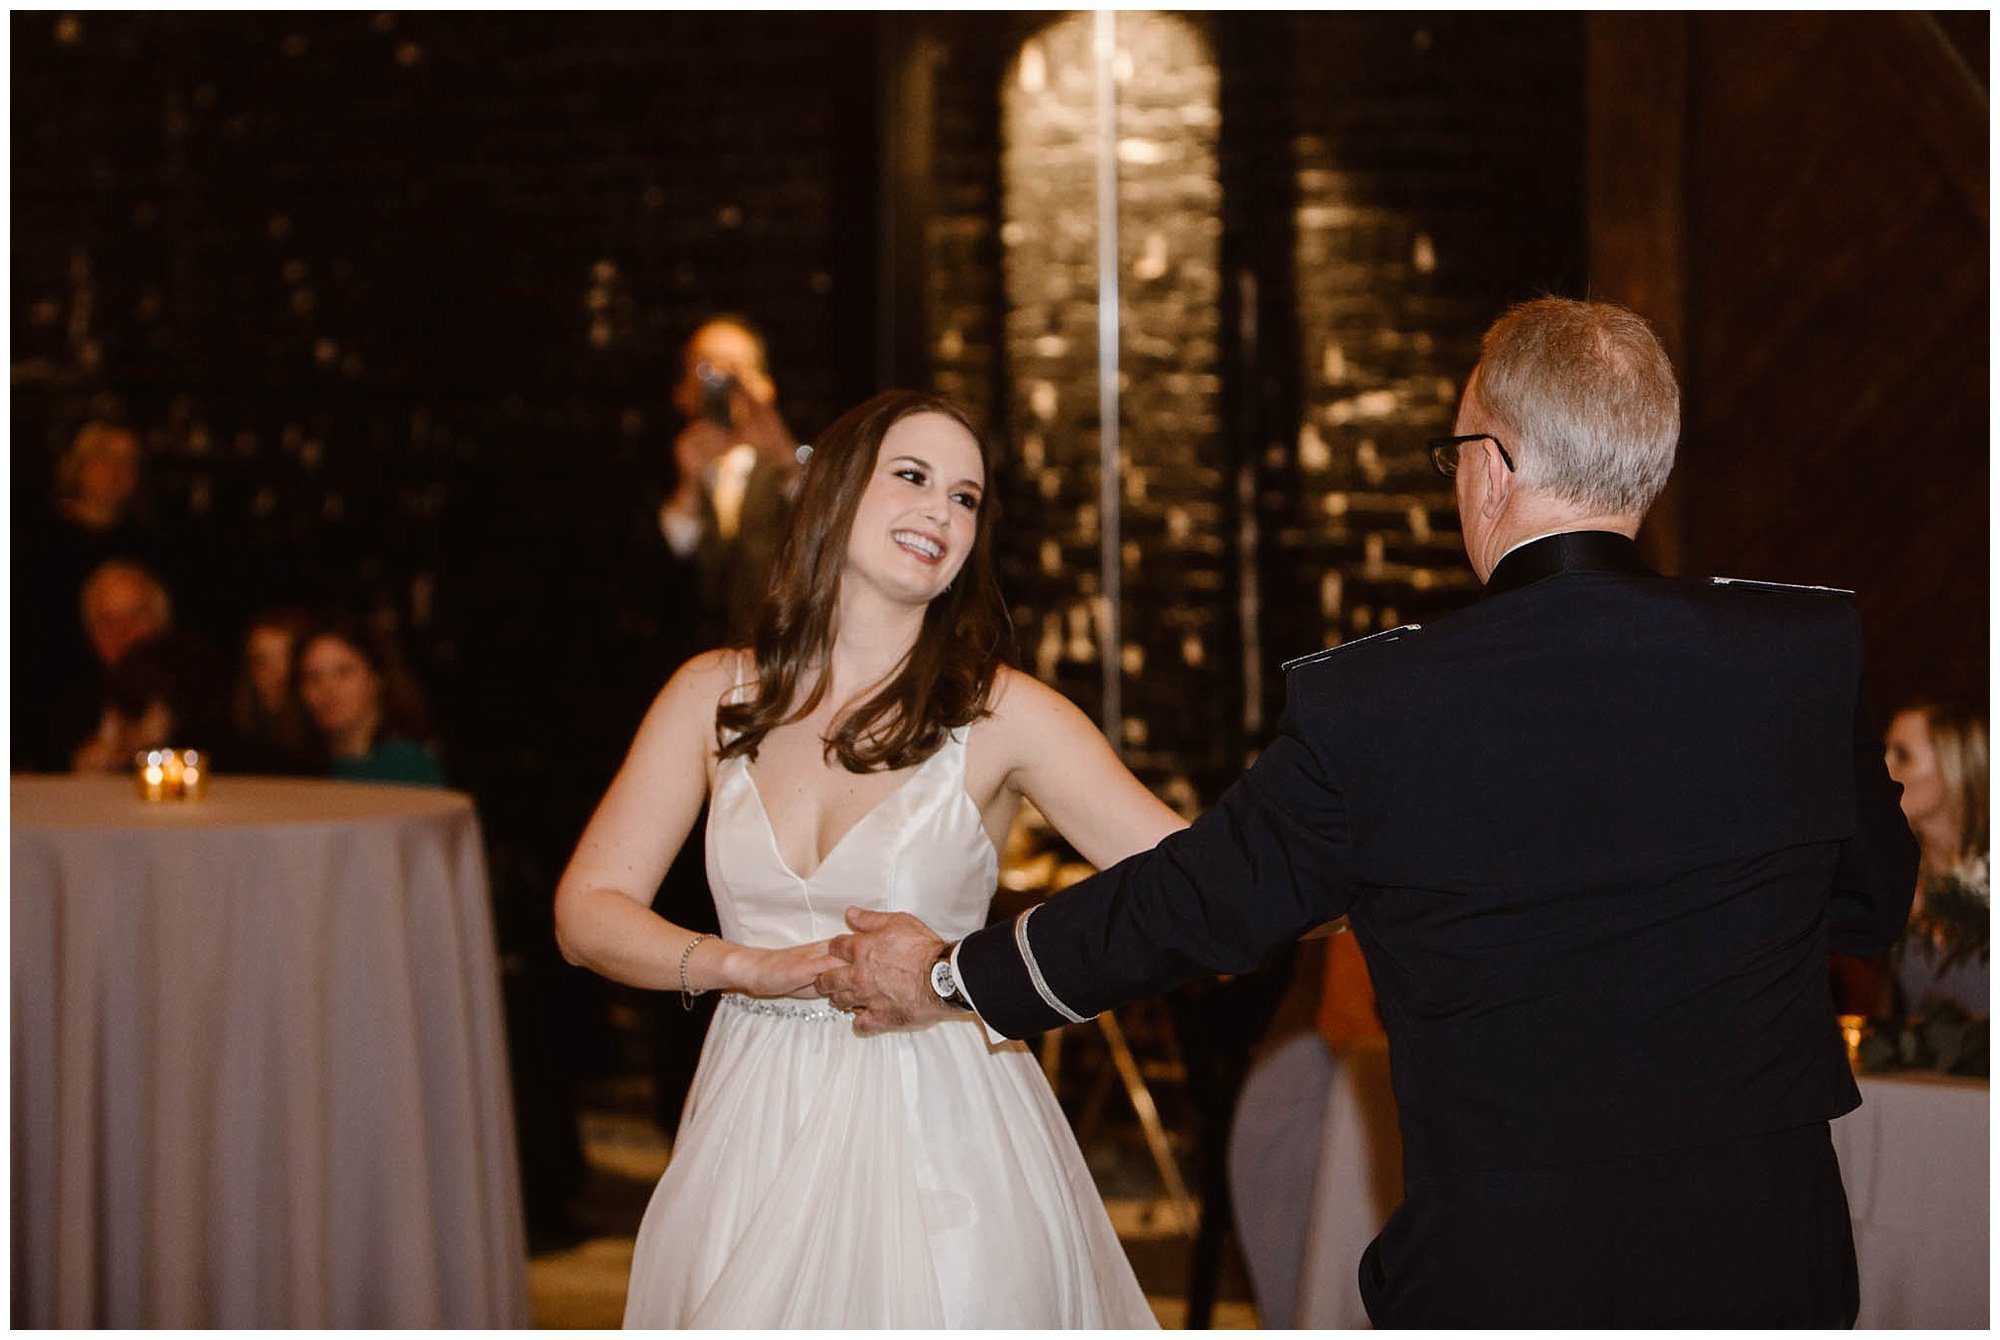 First dance between bride and groom at Jackson Terminal Wedding